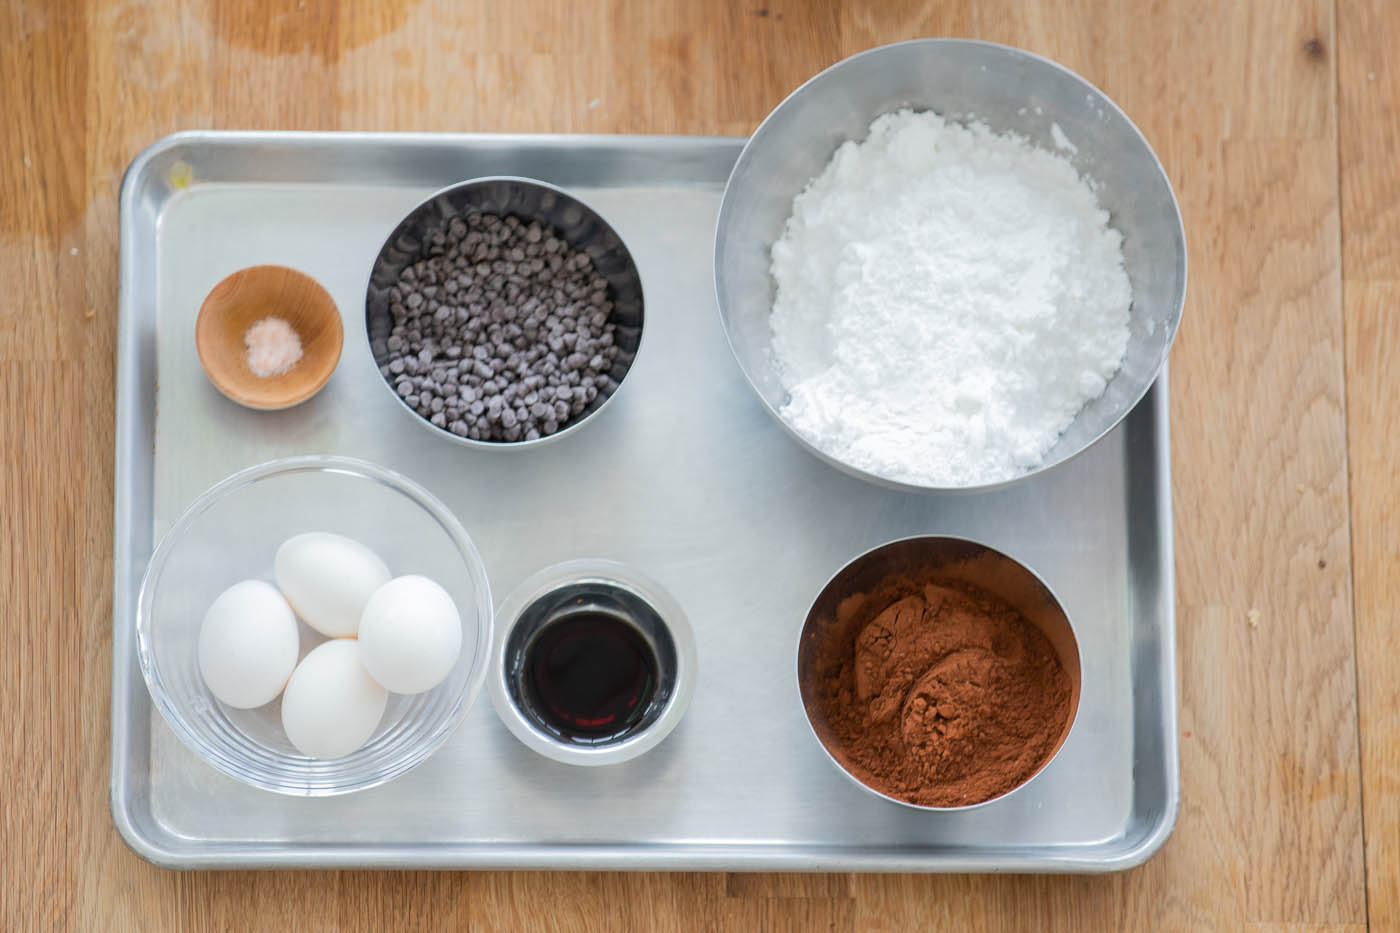 The Real Food Academy Miami - How to Mise en Place